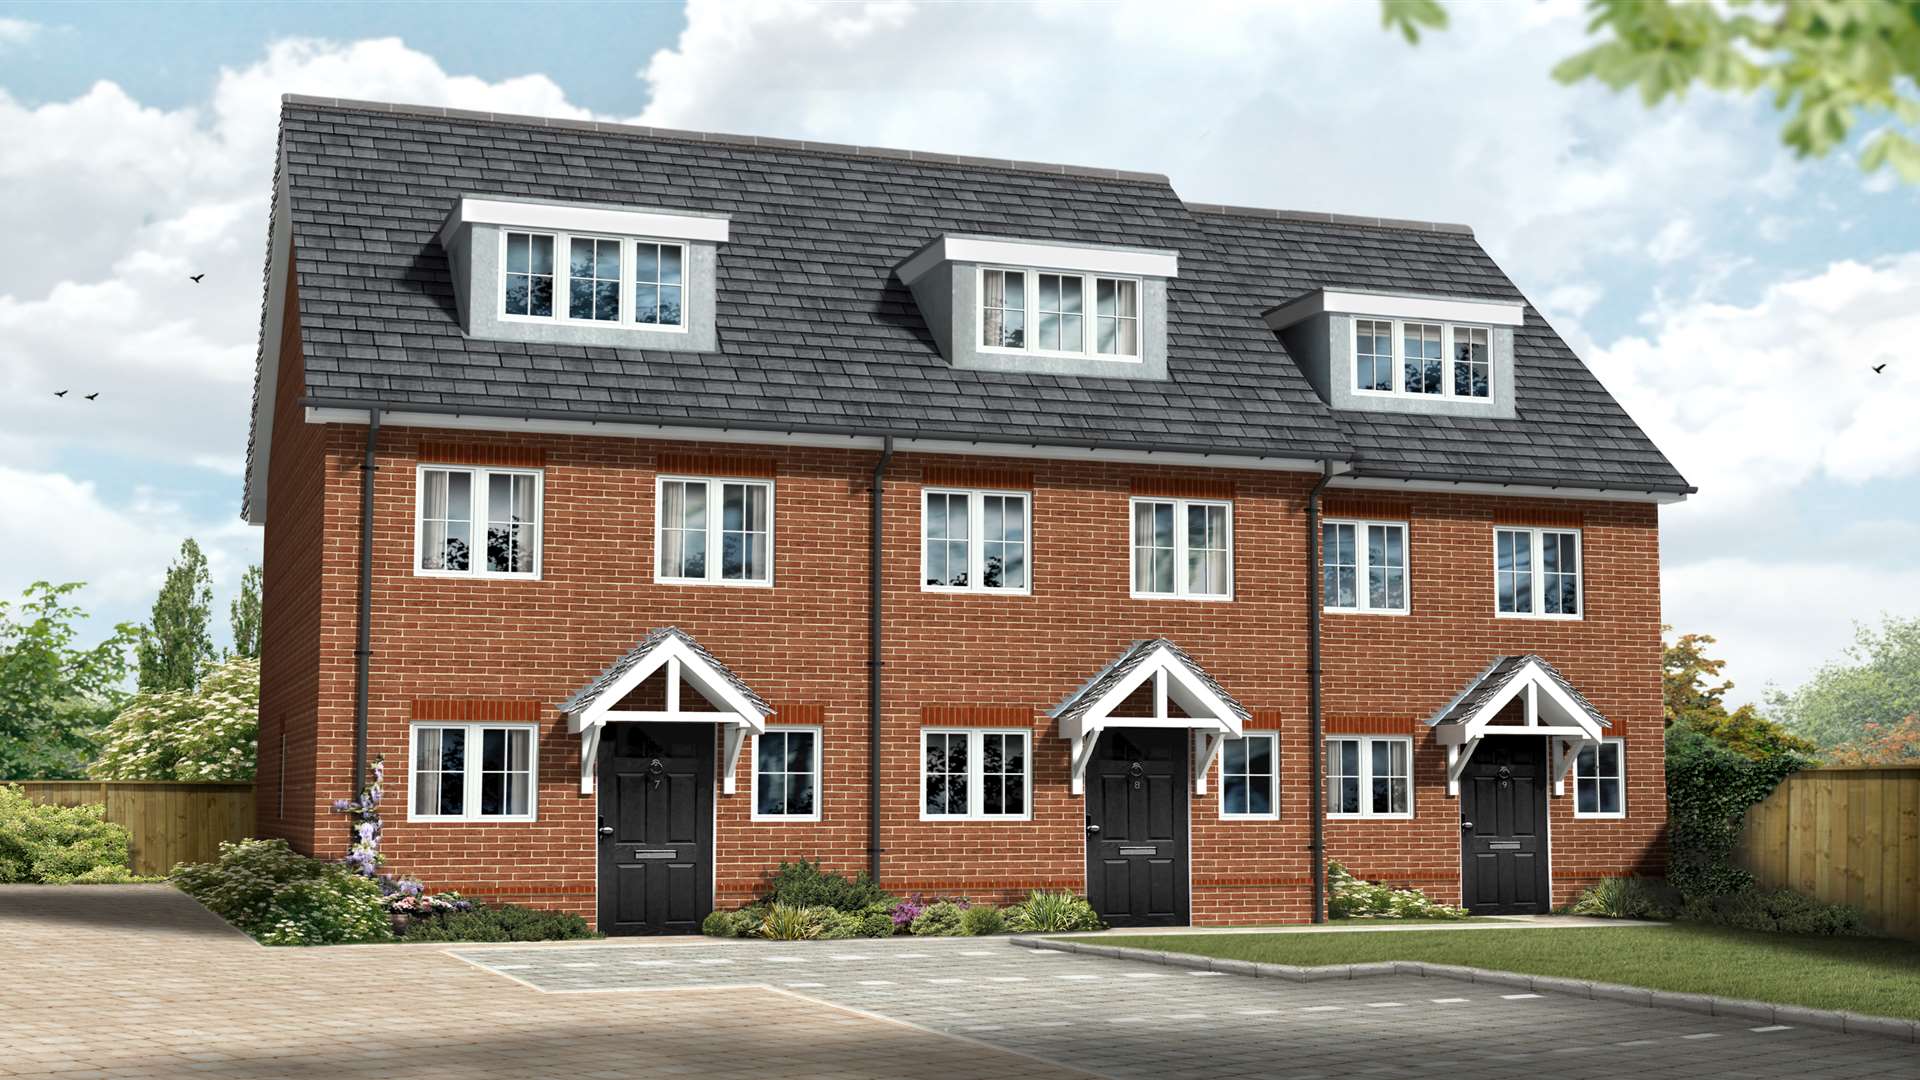 New homes are contained in Woolhouse Place, Stone, Dartford